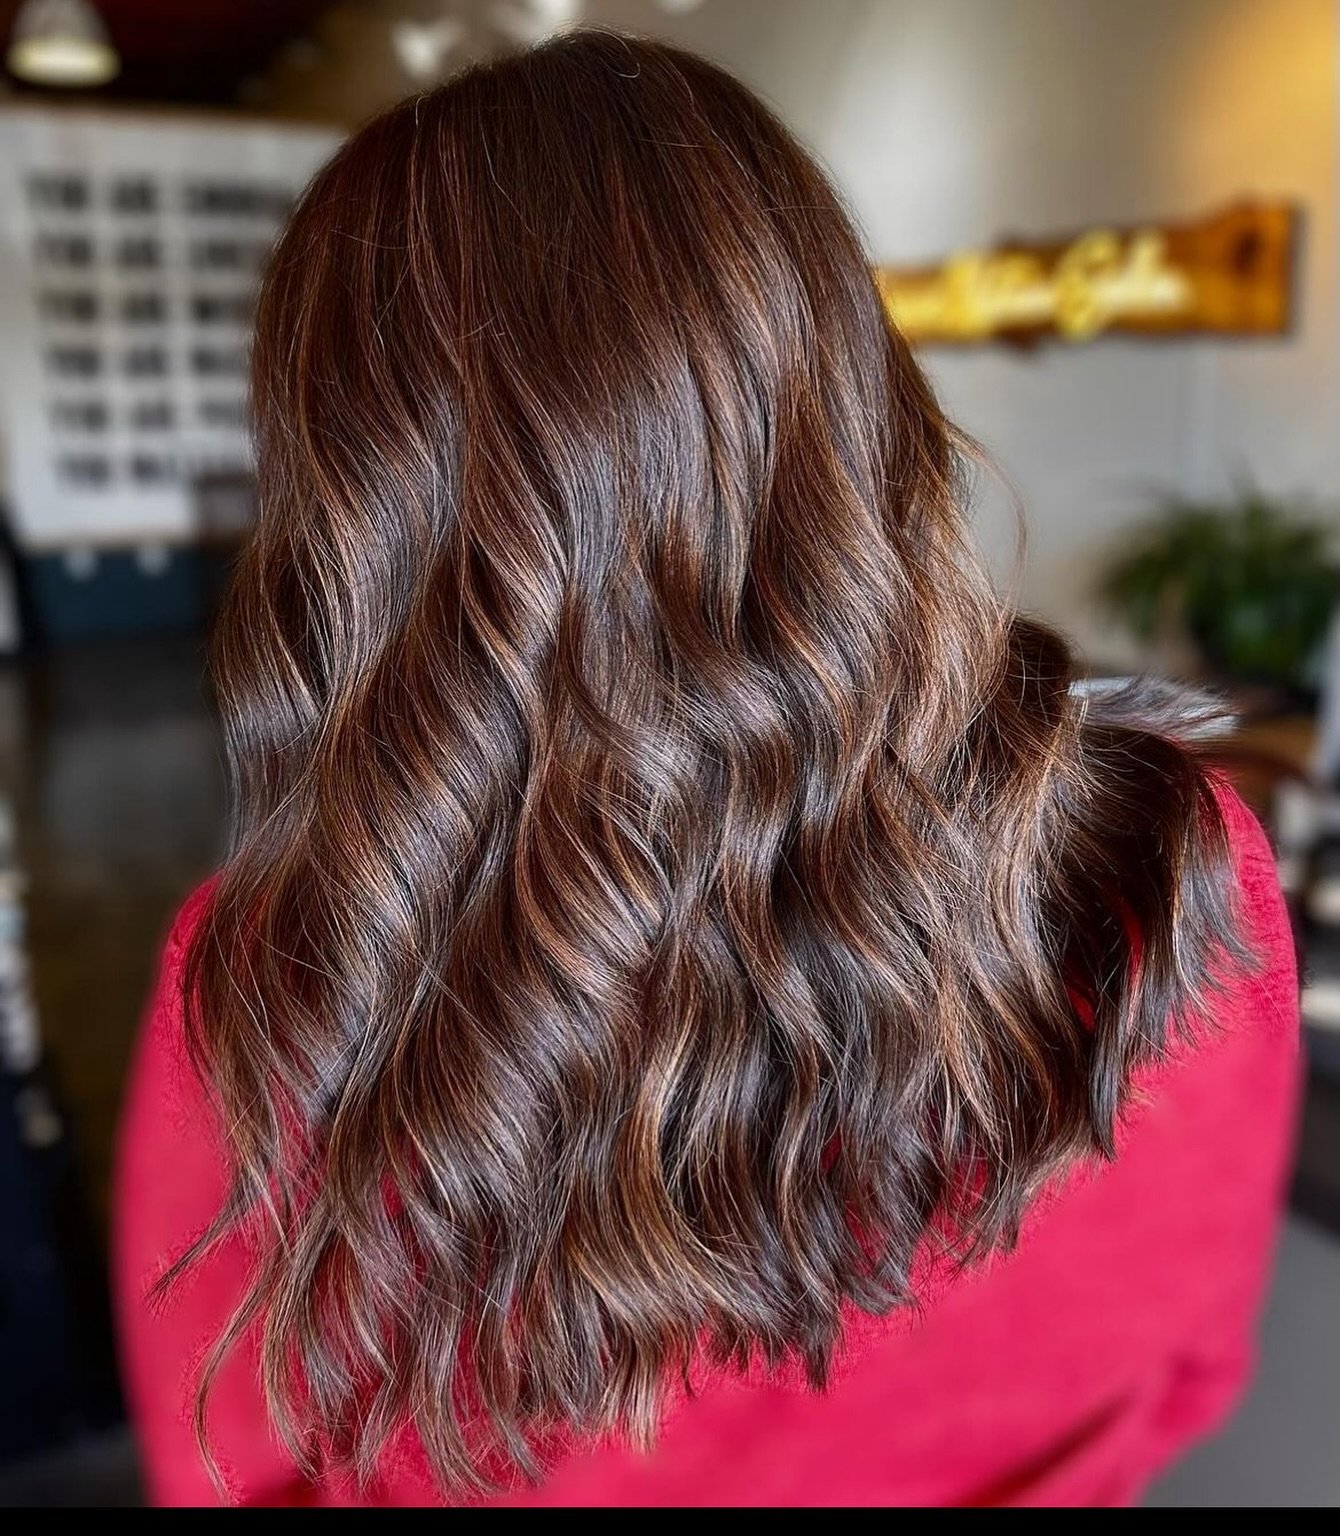 Brunette and Boujee✨

We&rsquo;re loving all of the brunette baddies we&rsquo;ve been getting in our chairs! @stylist.lyssa always and forever slays these colors for reallllll🤩

-
-
-
Call 505/883/9707 to book today!
#brunettelove #brunettebaddie #b